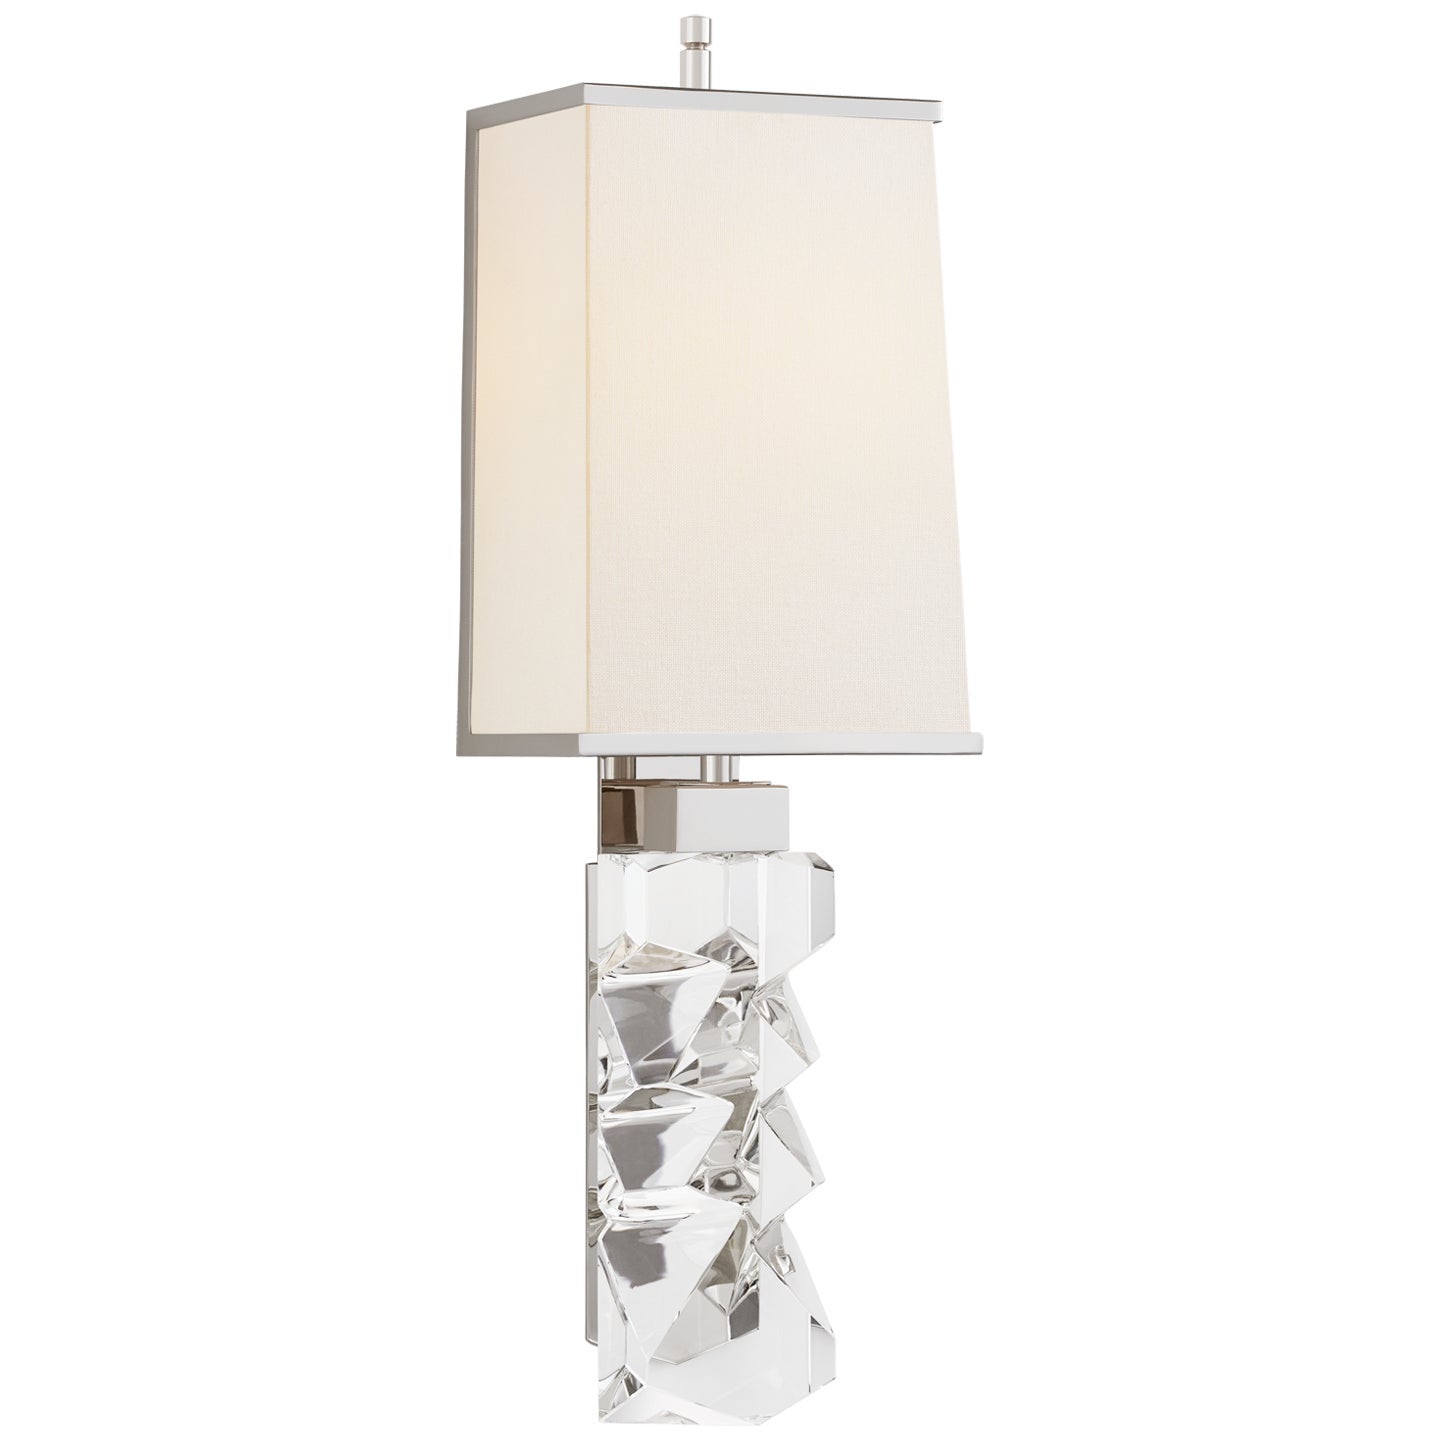 Visual Comfort Signature - TOB 2950CG/PN-L/PN - Two Light Wall Sconce - Argentino - Crystal and Polished Nickel